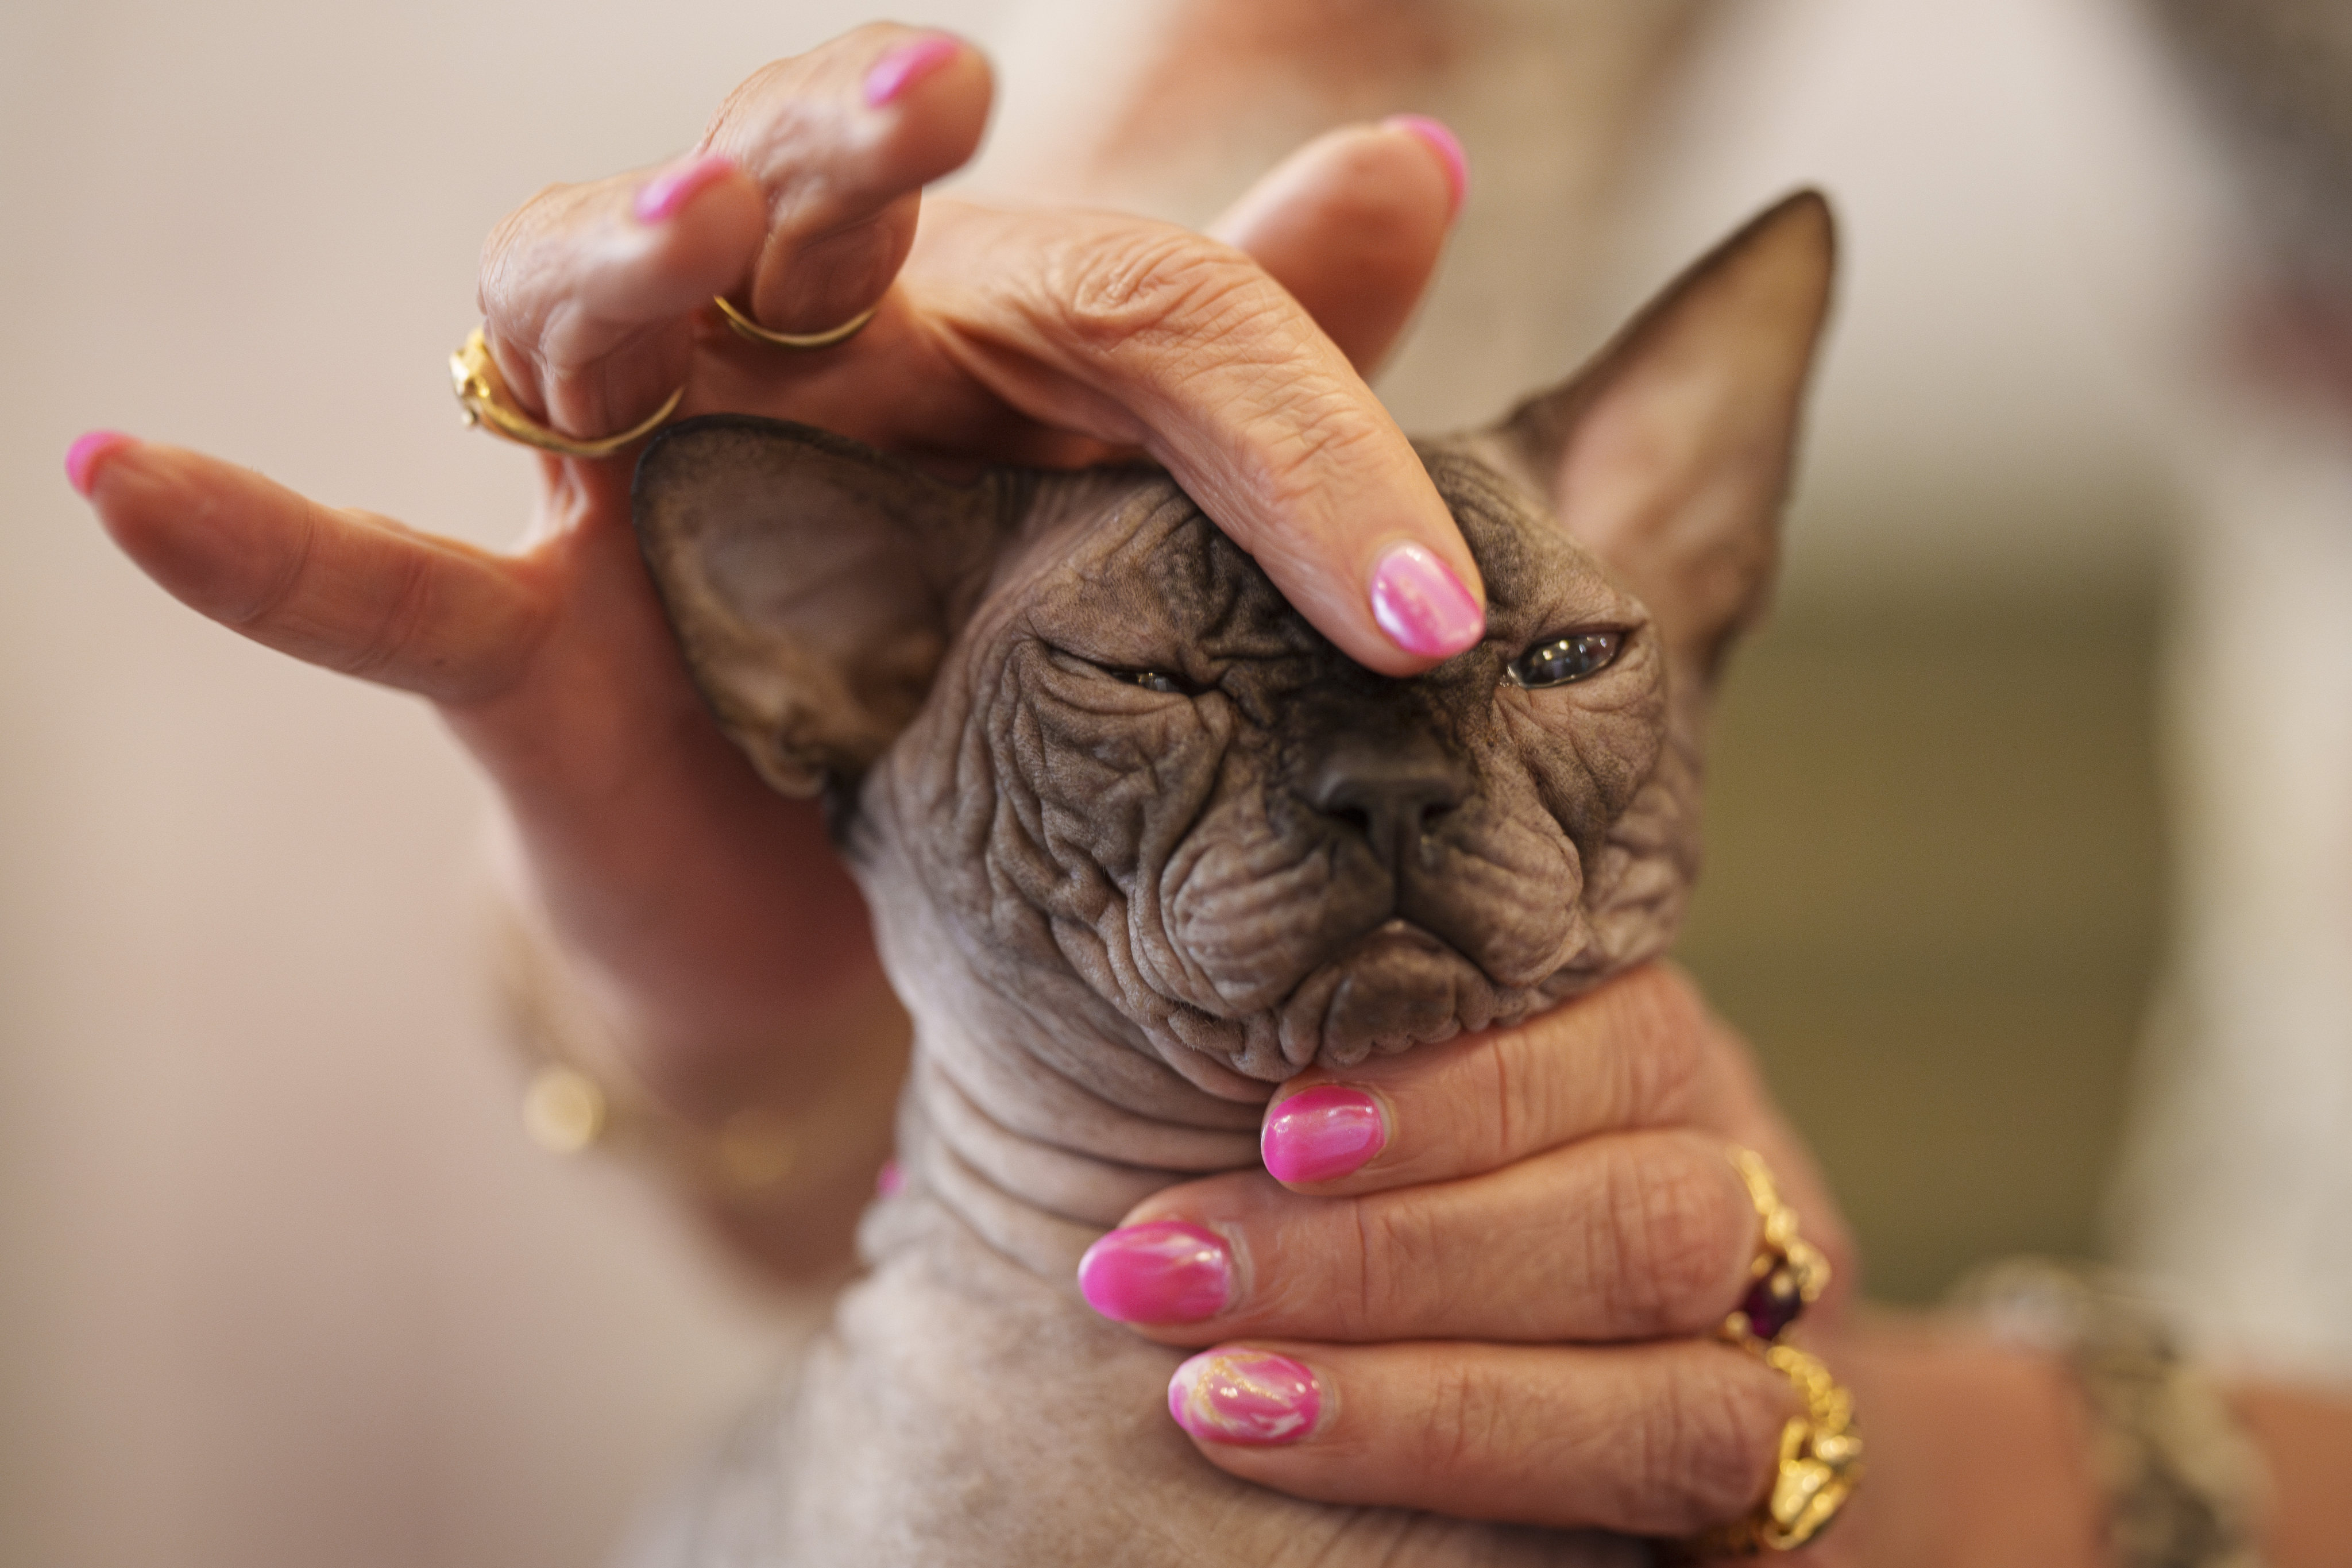 A cat is examined by a judge during an international feline beauty contest in Romania. Photo: AP